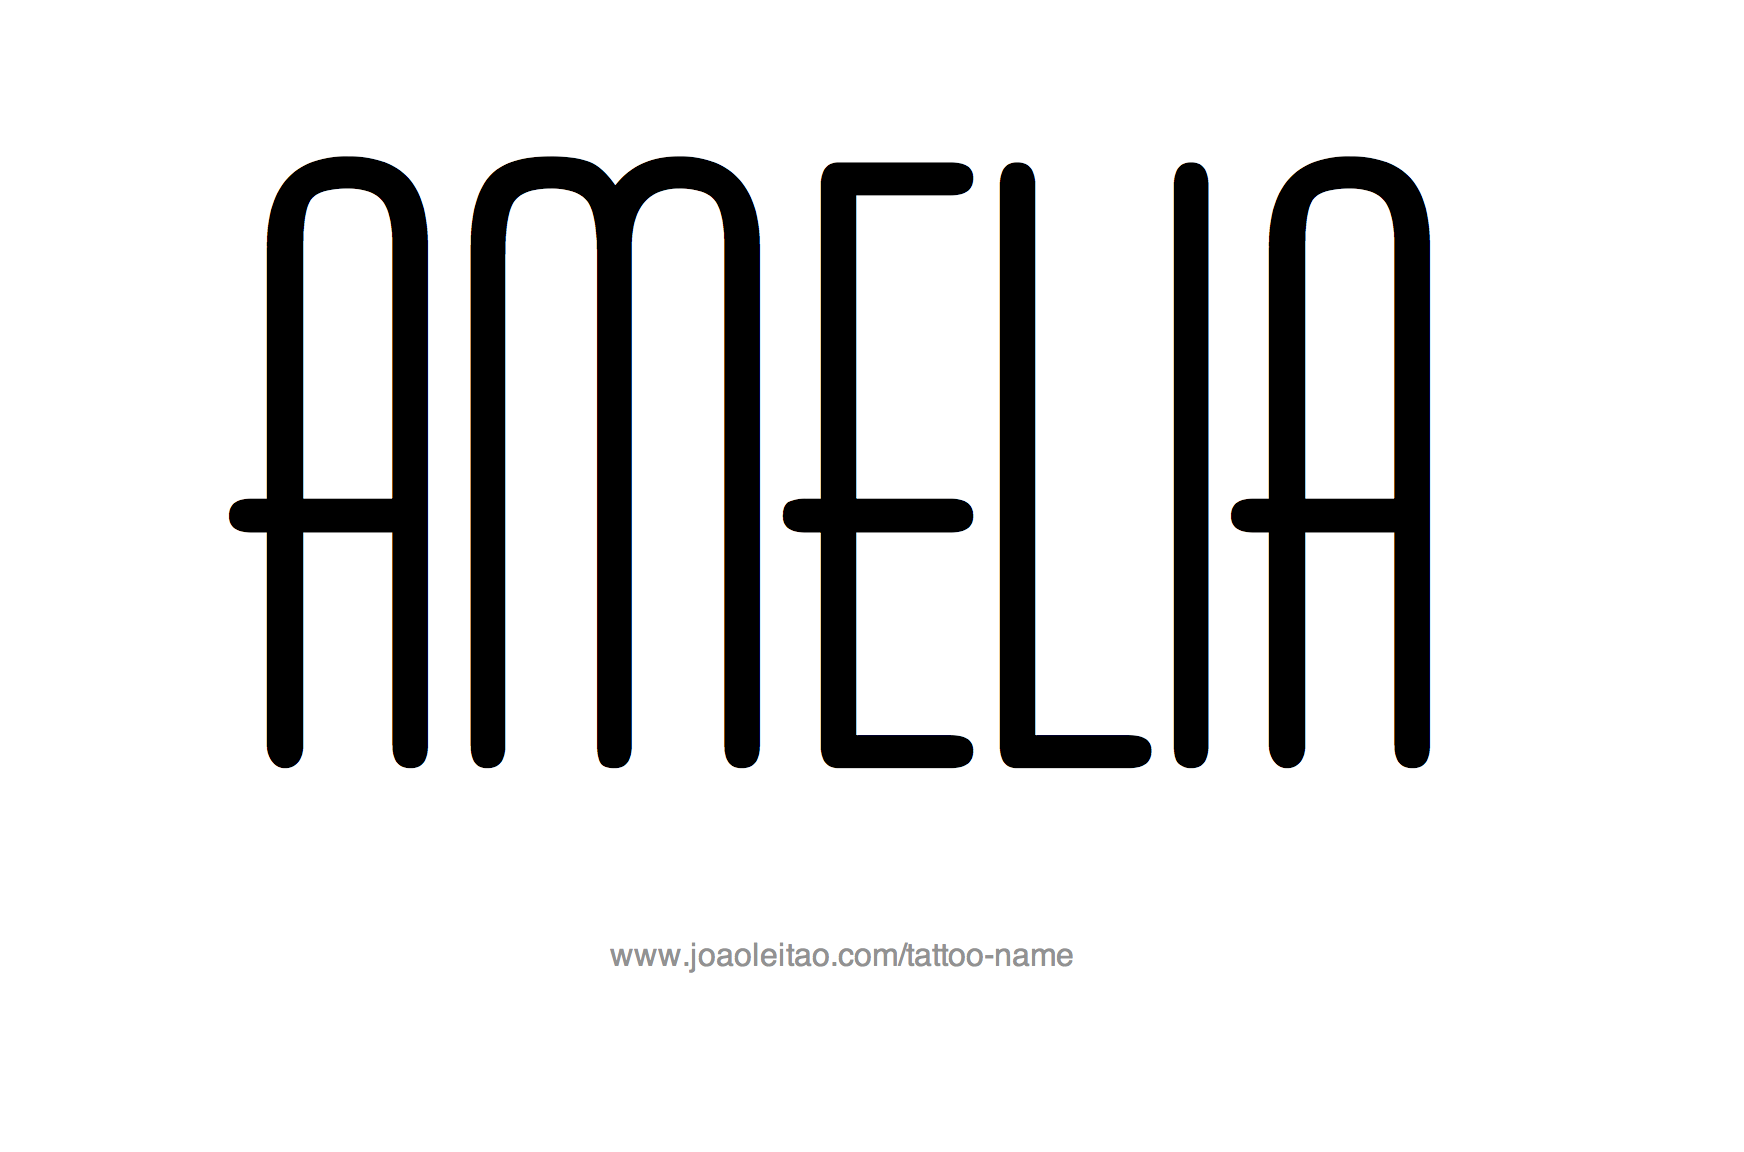 Amelia Name Images - ClipArt Best